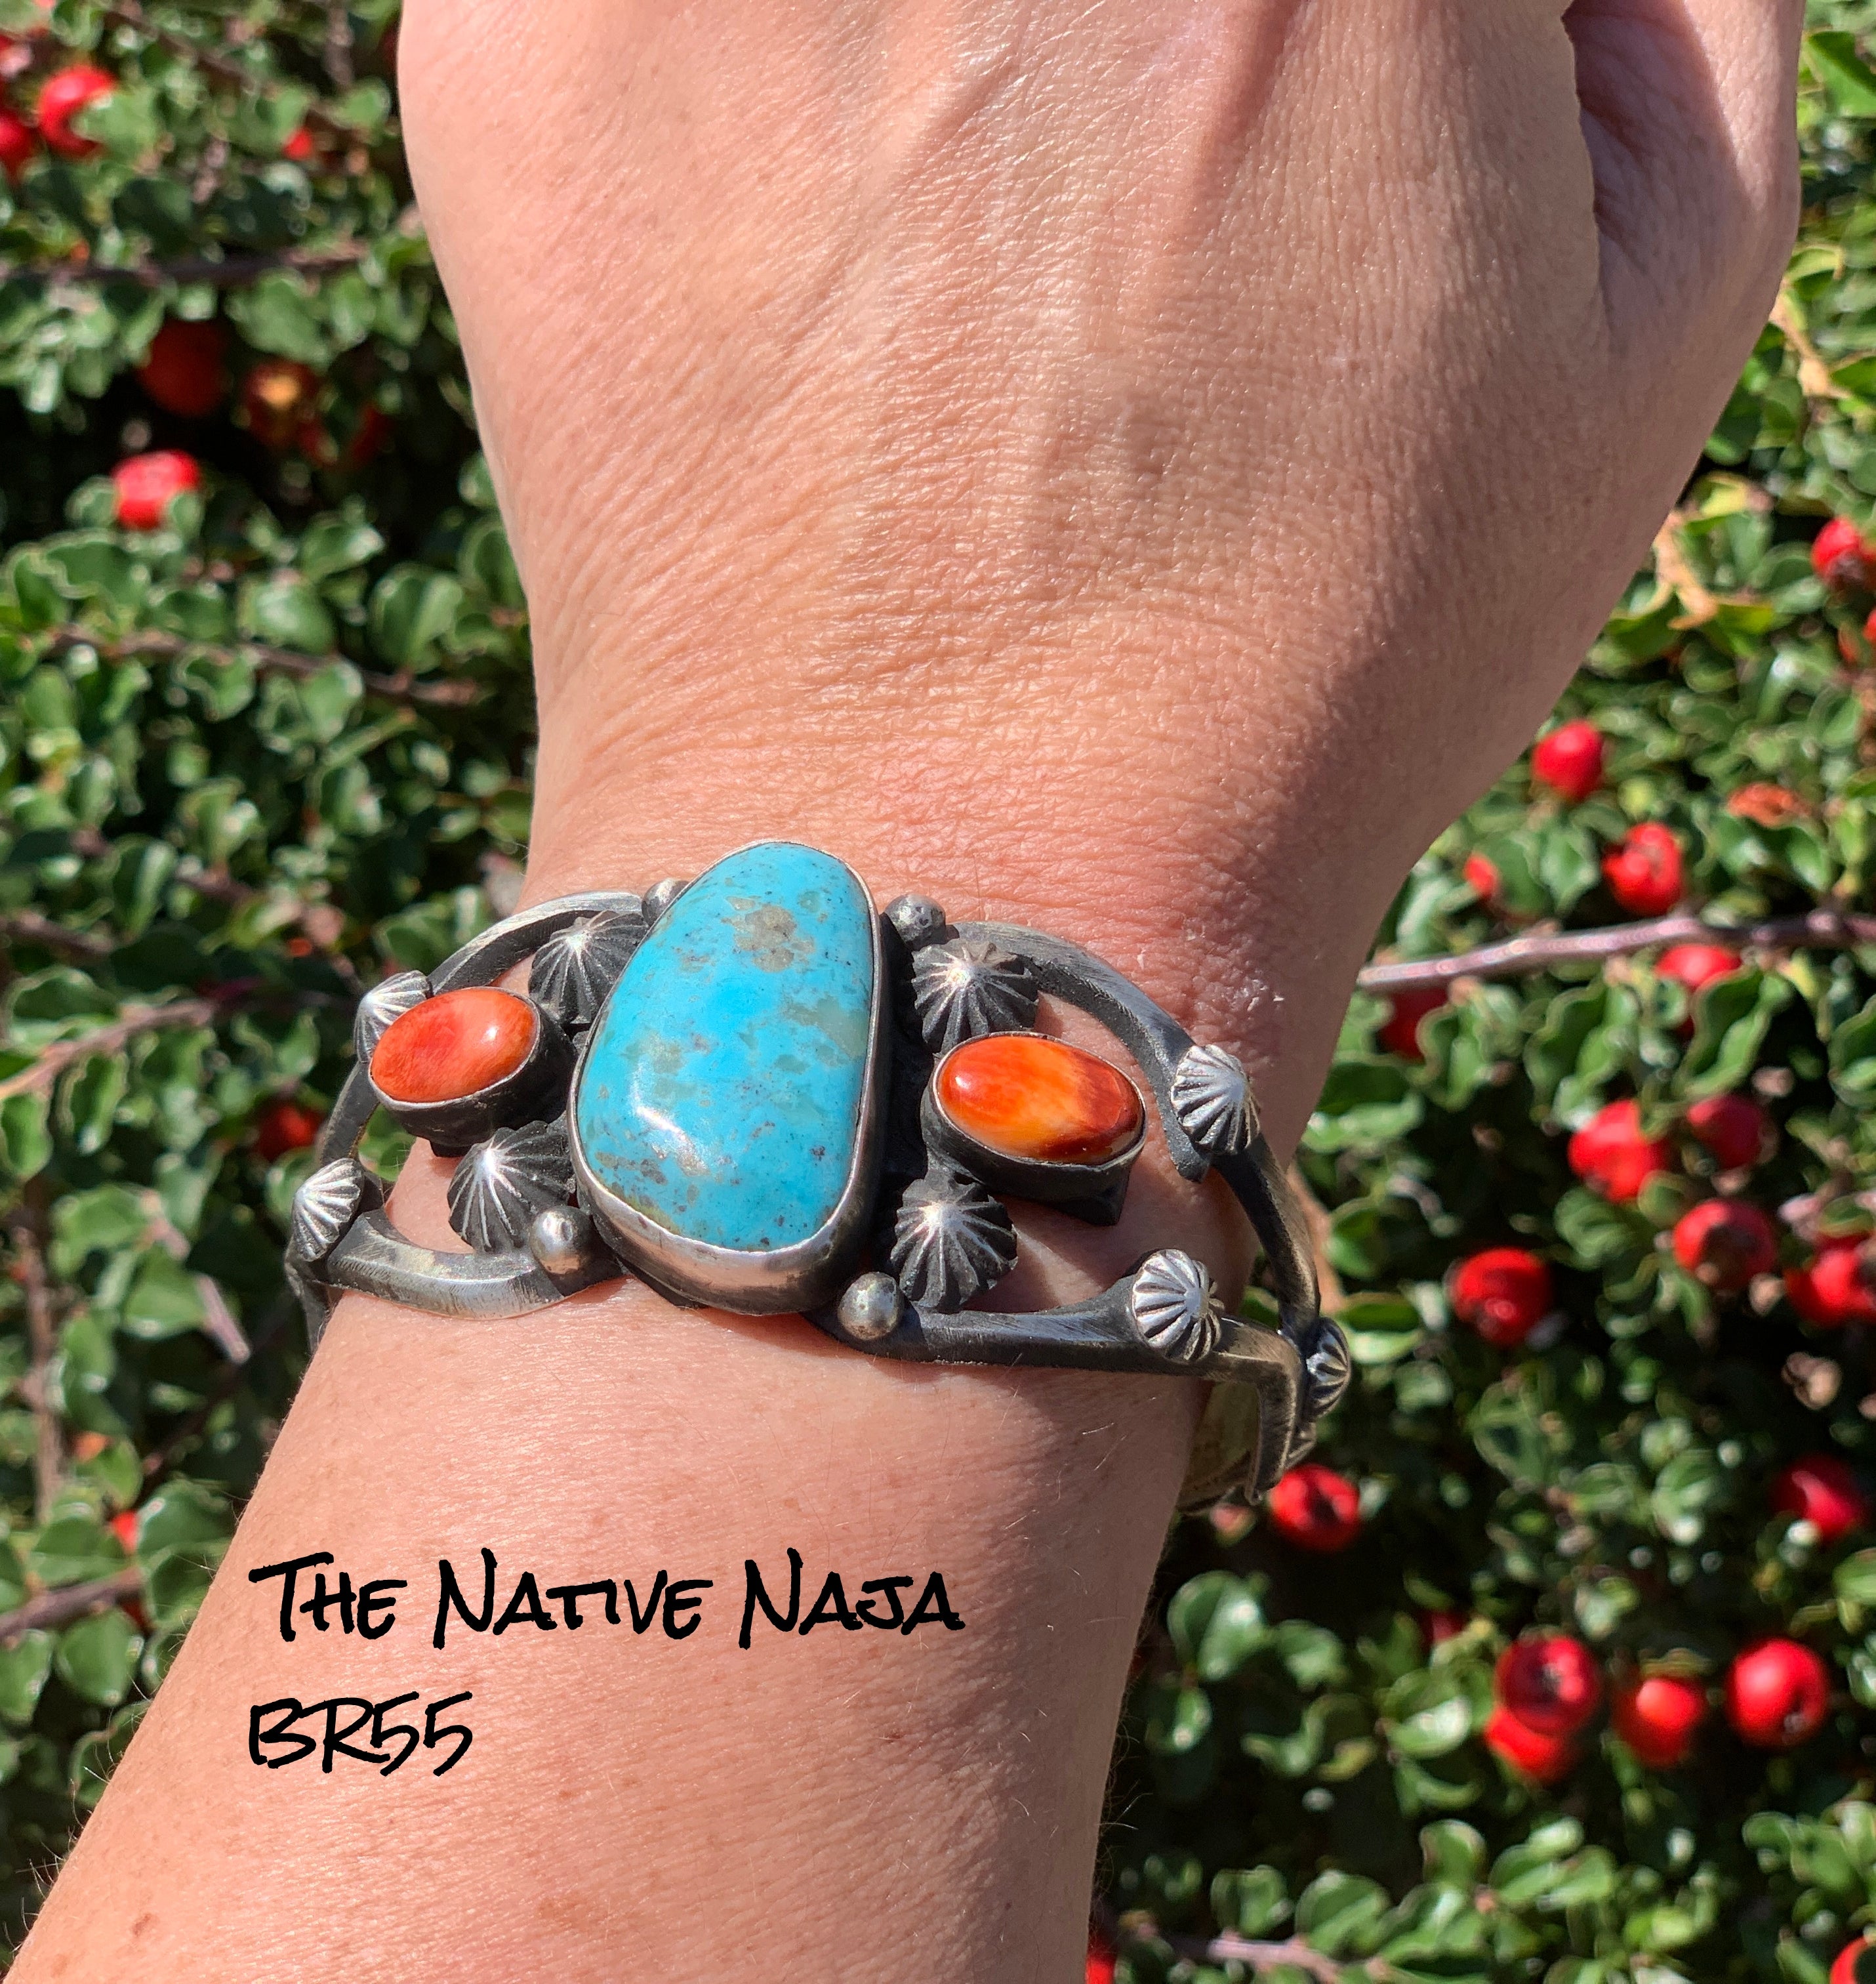 Navajo Chimney Butte Sterling Silver Spiny Oyster & Kingman Turquoise Cuff Bracelet BR55